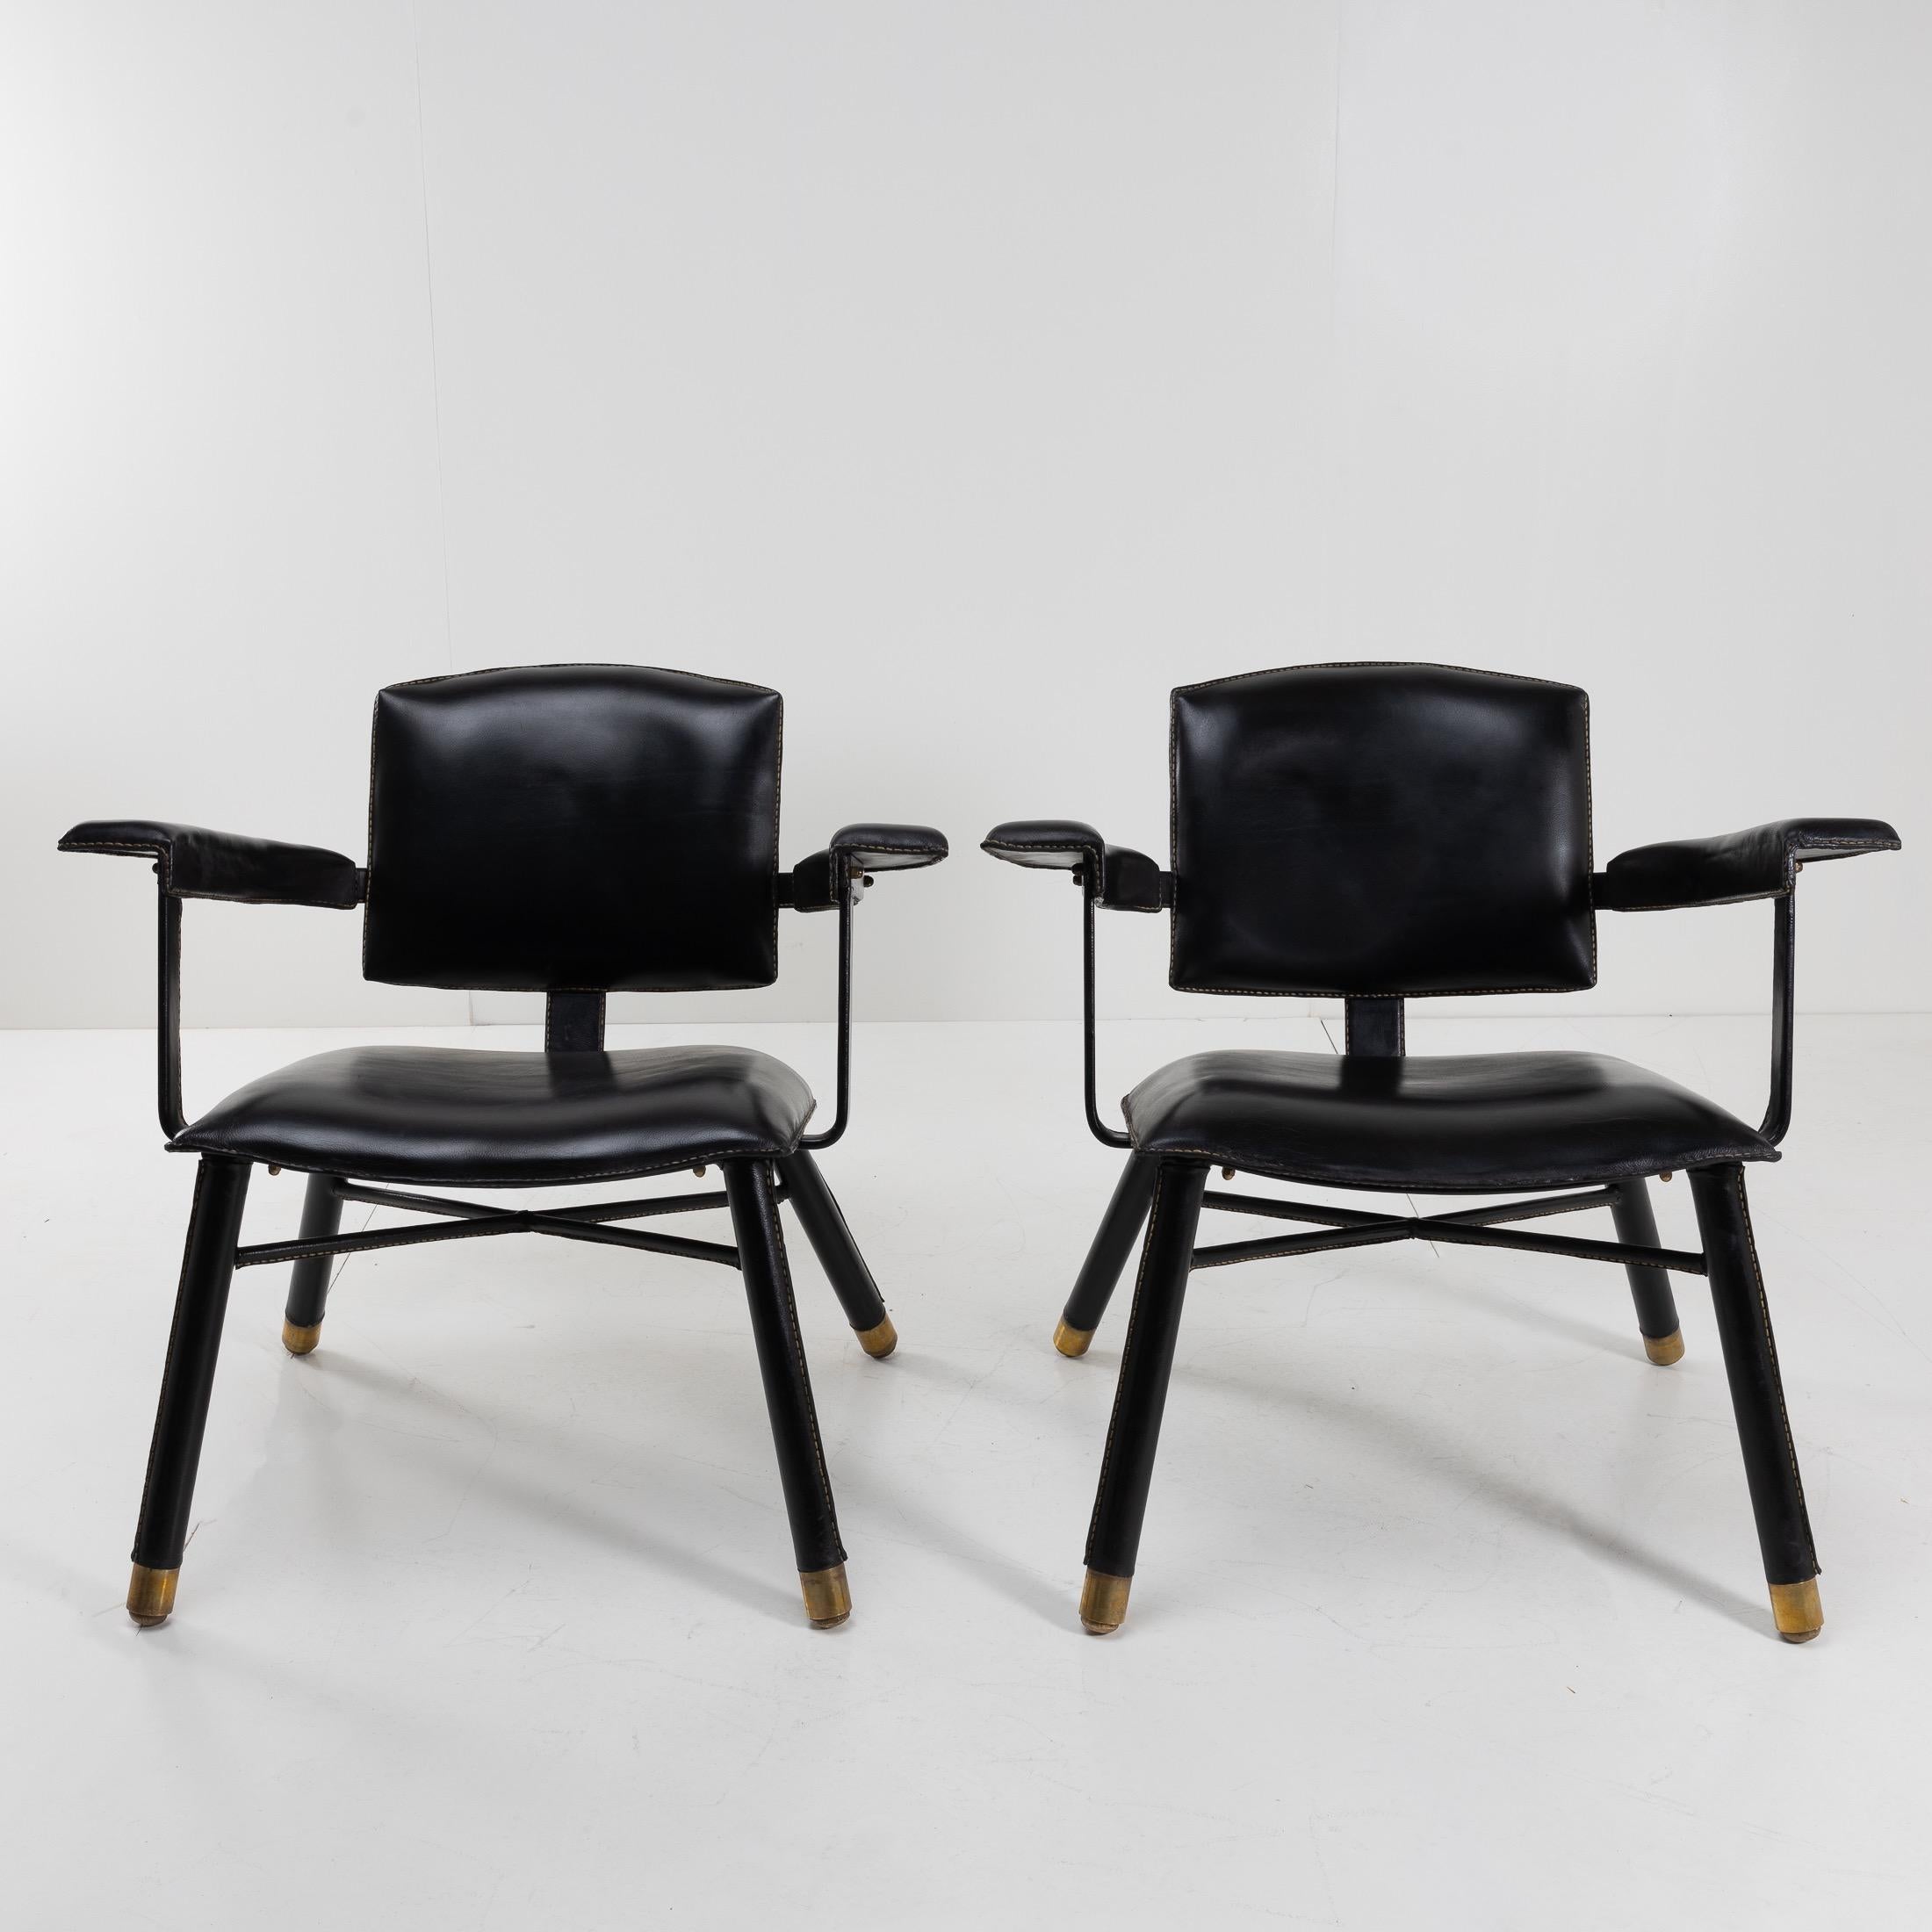 French Pair of Black Leather Armchairs Called “Chauffeuse” by Jacques Adnet